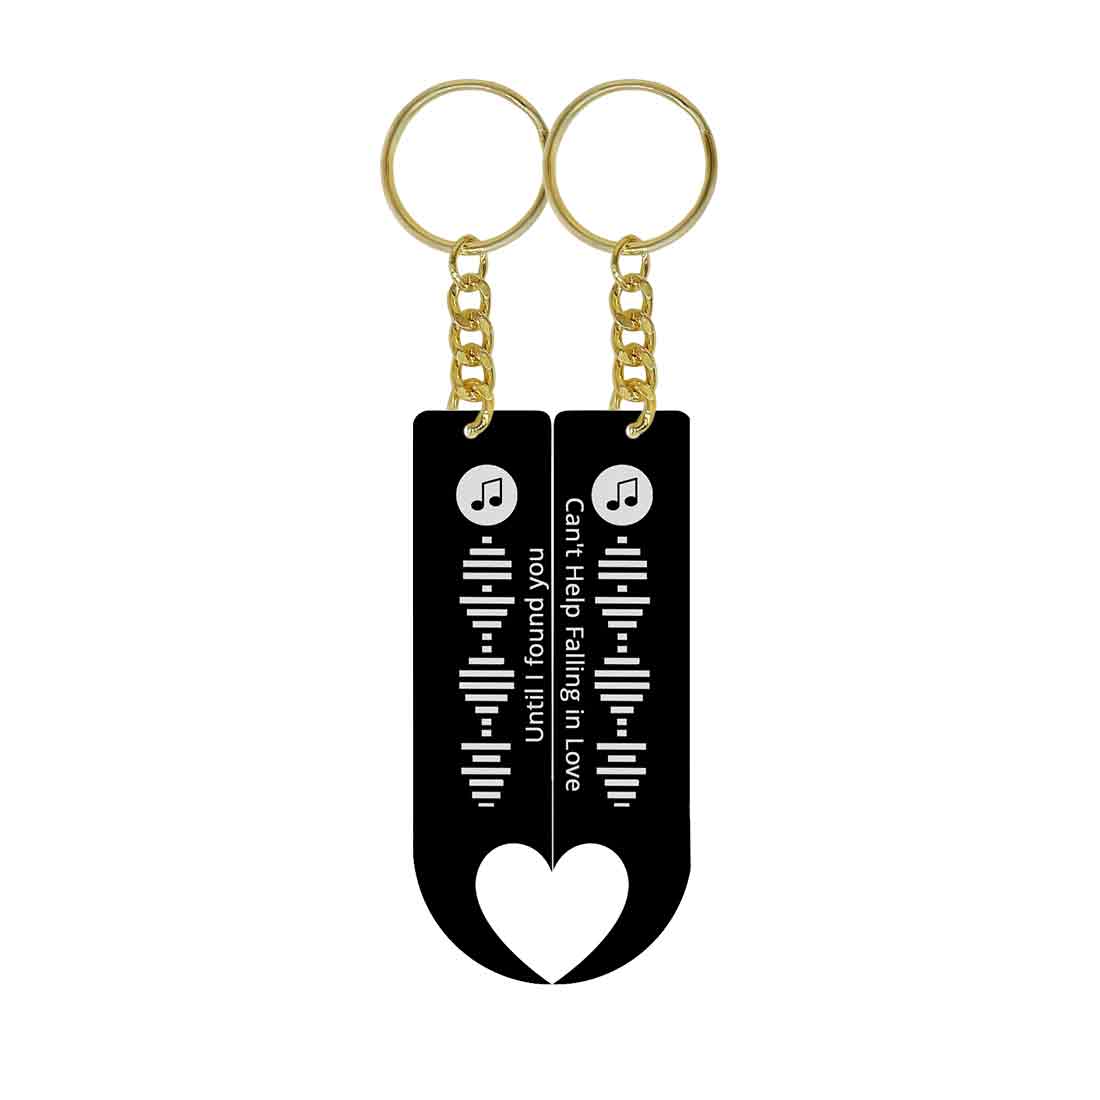 Couple Key Ring Keychain for Couples-Set of 2